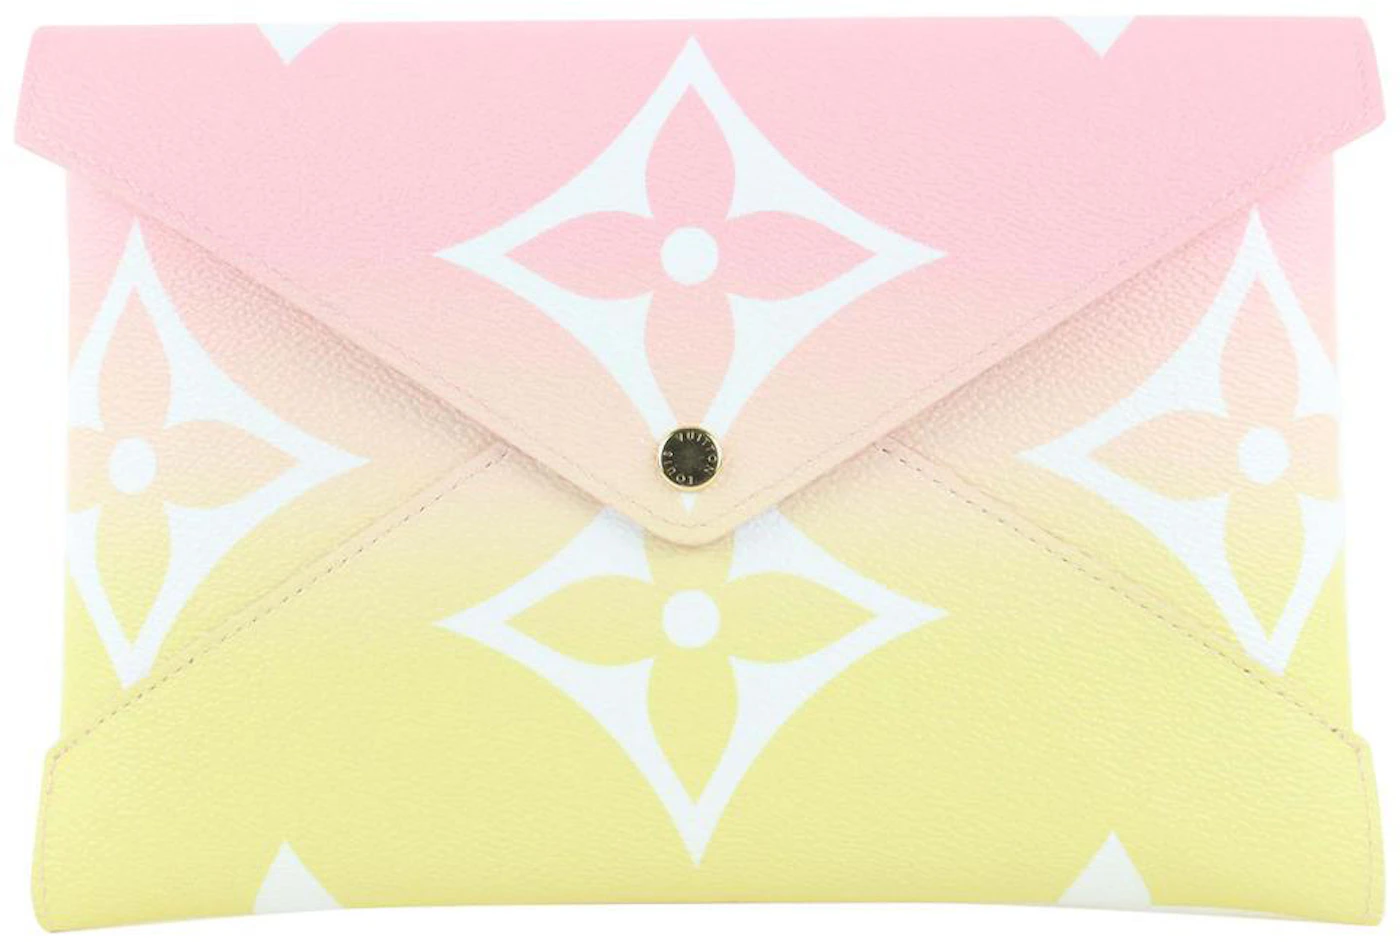 Louis Vuitton Key Pouch Pink in Coated Canvas with Gold-tone - US